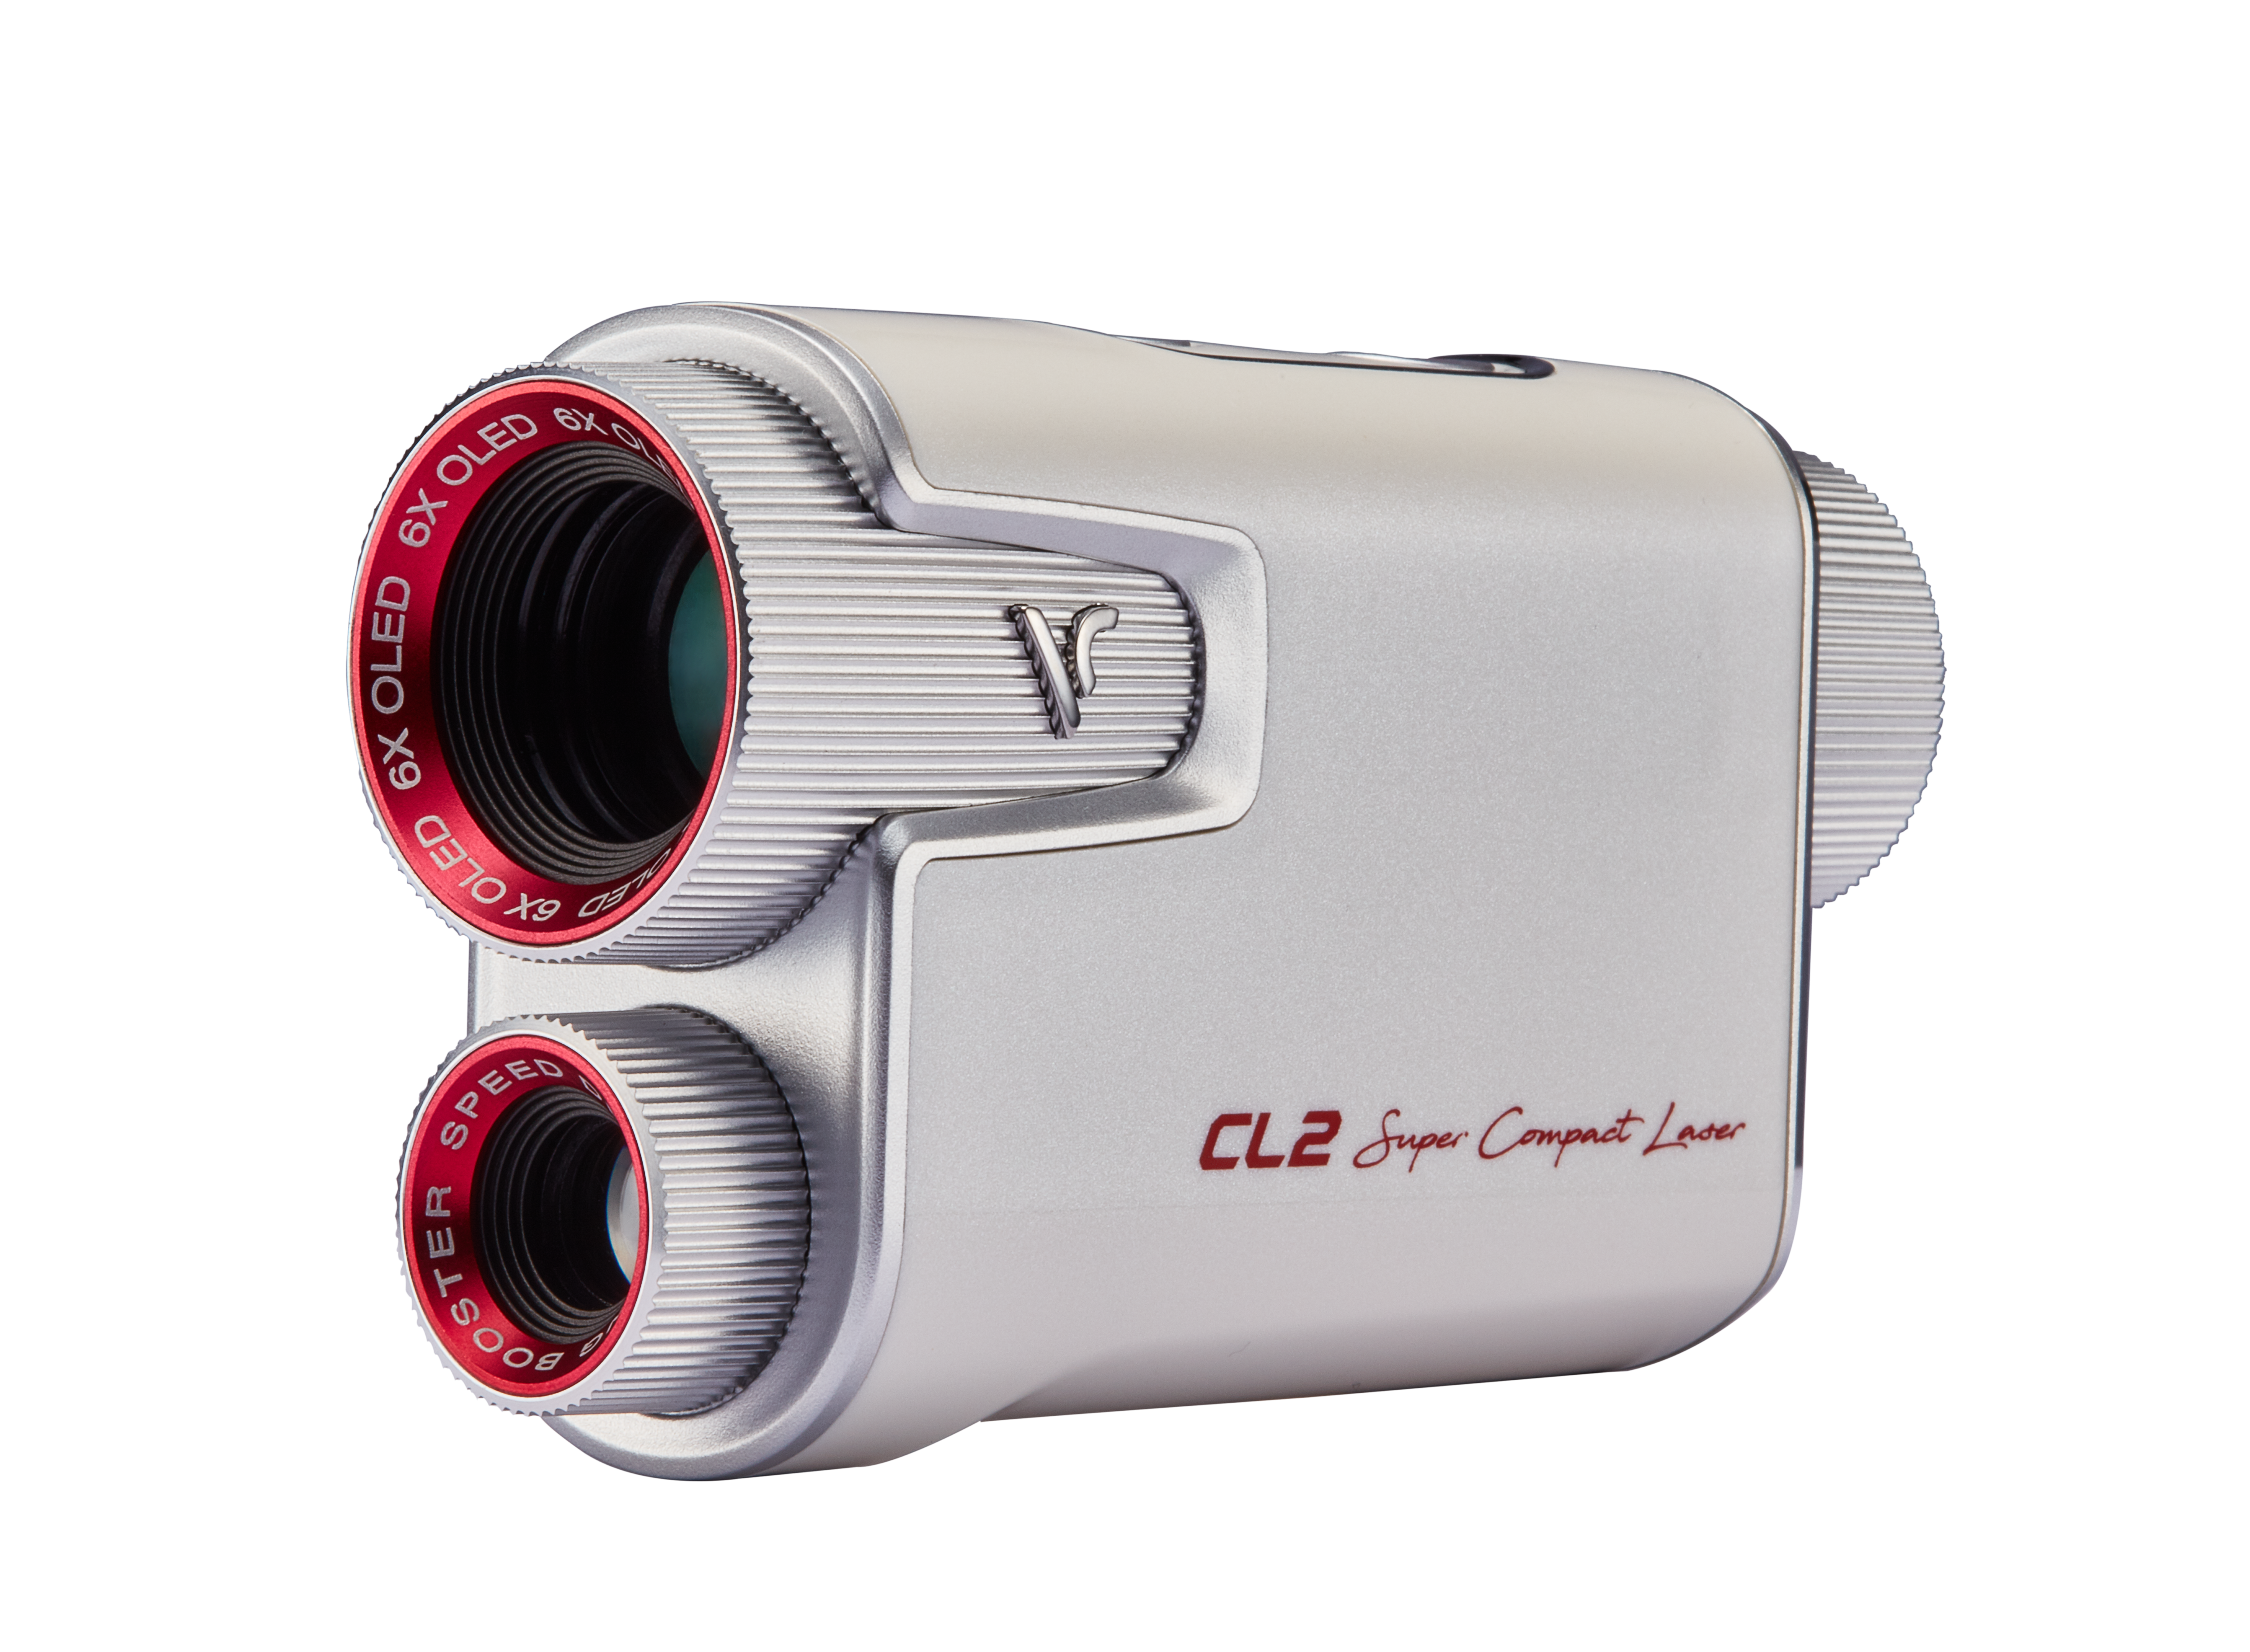 CL2 Special Edition Compact Laser Rangefinder with Slope